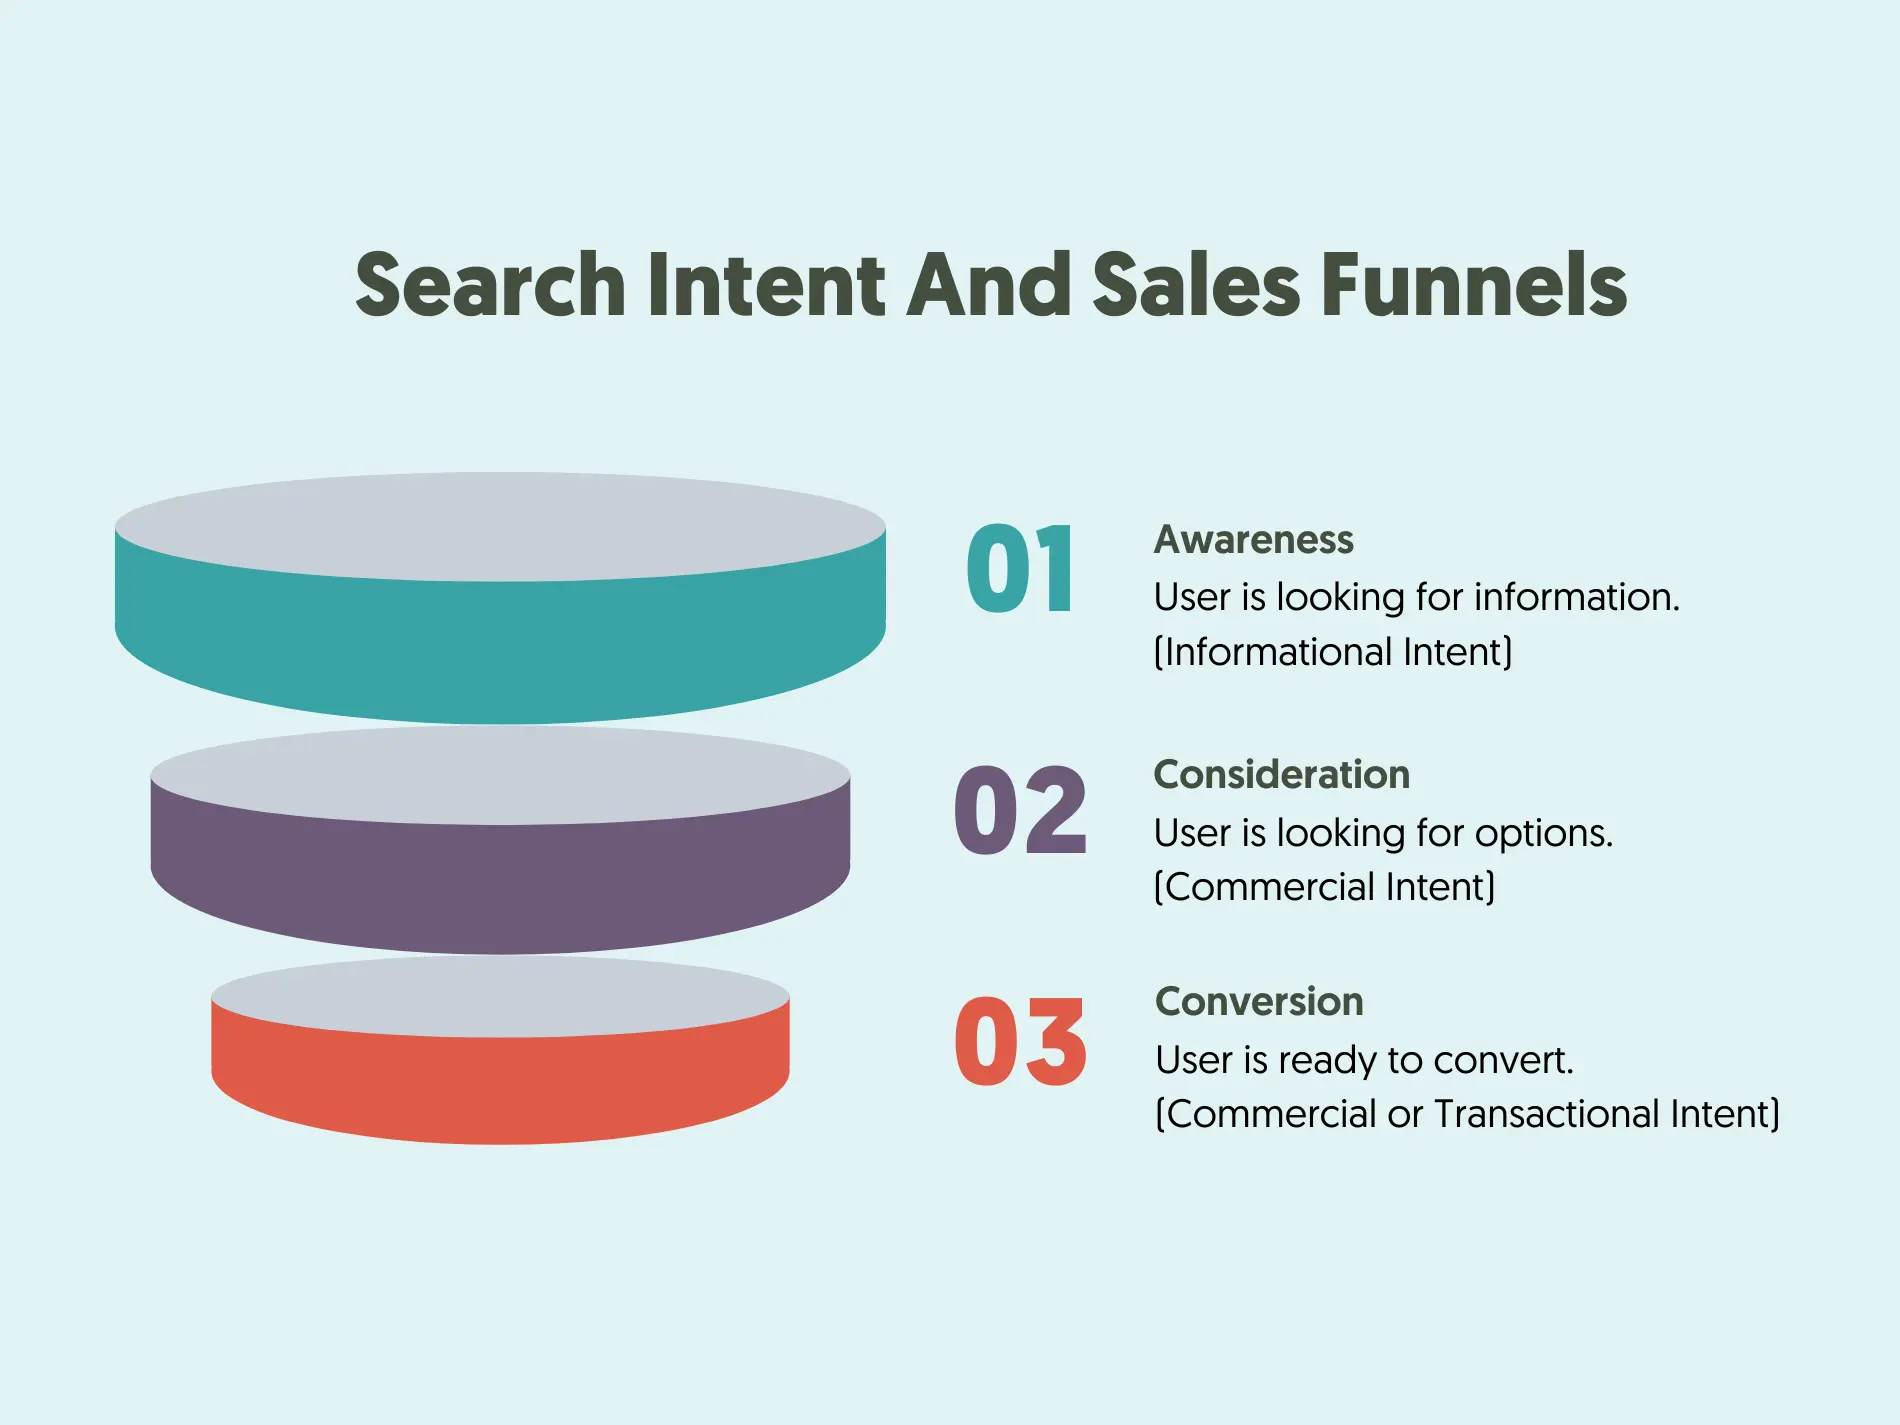 Search Intent And Sales Funnel